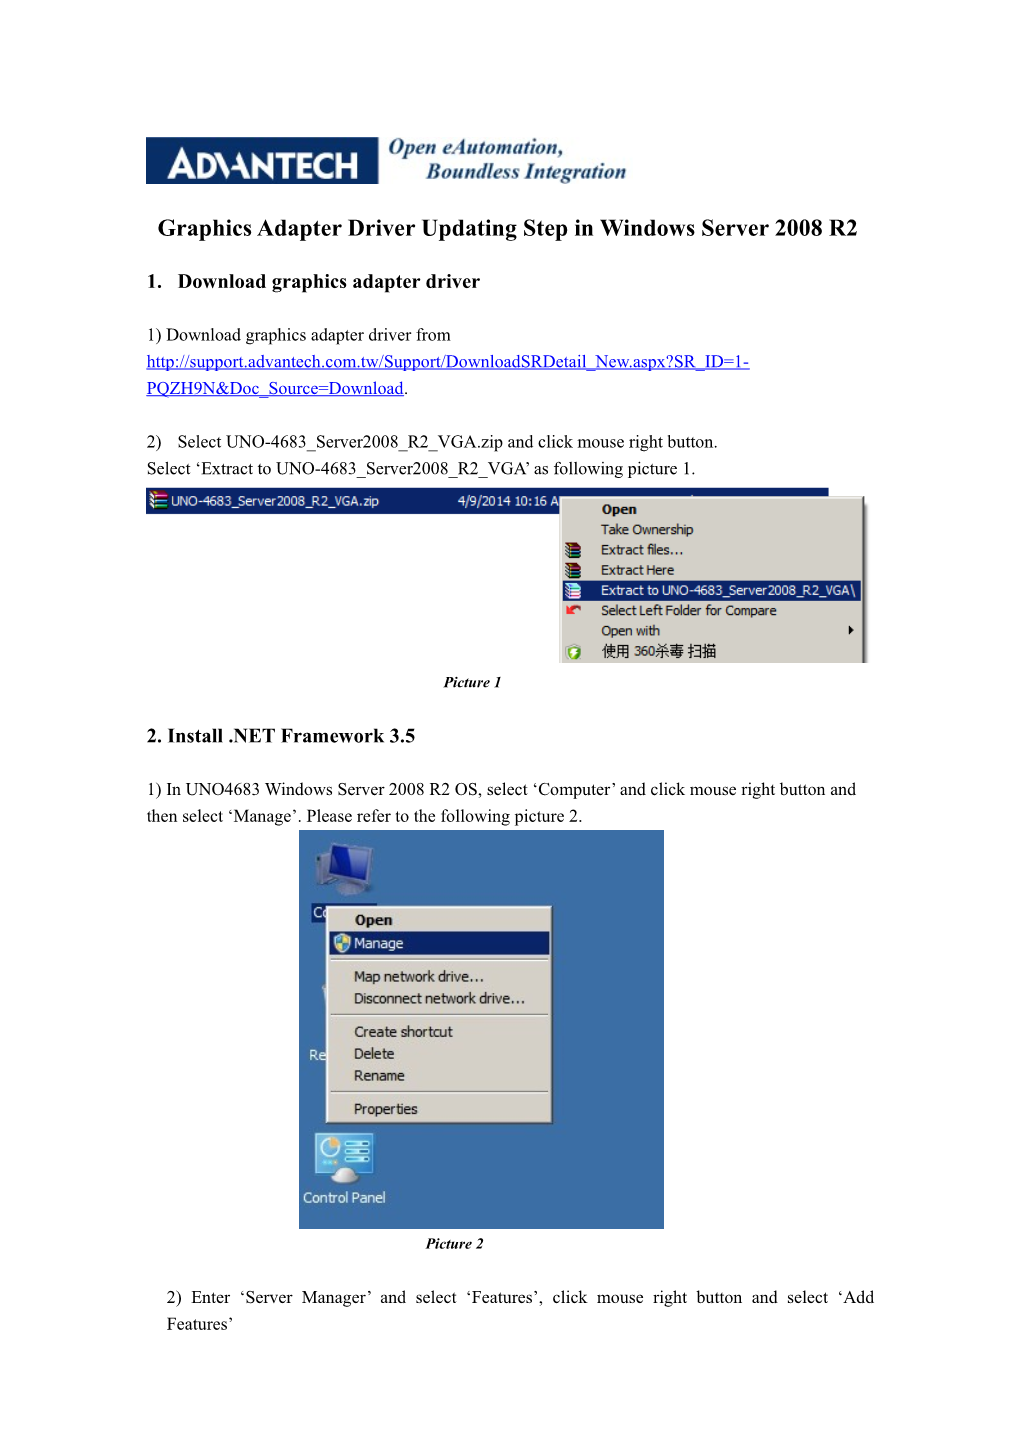 Graphics Adapter Driver Updating Step in Windows Server 2008 R2